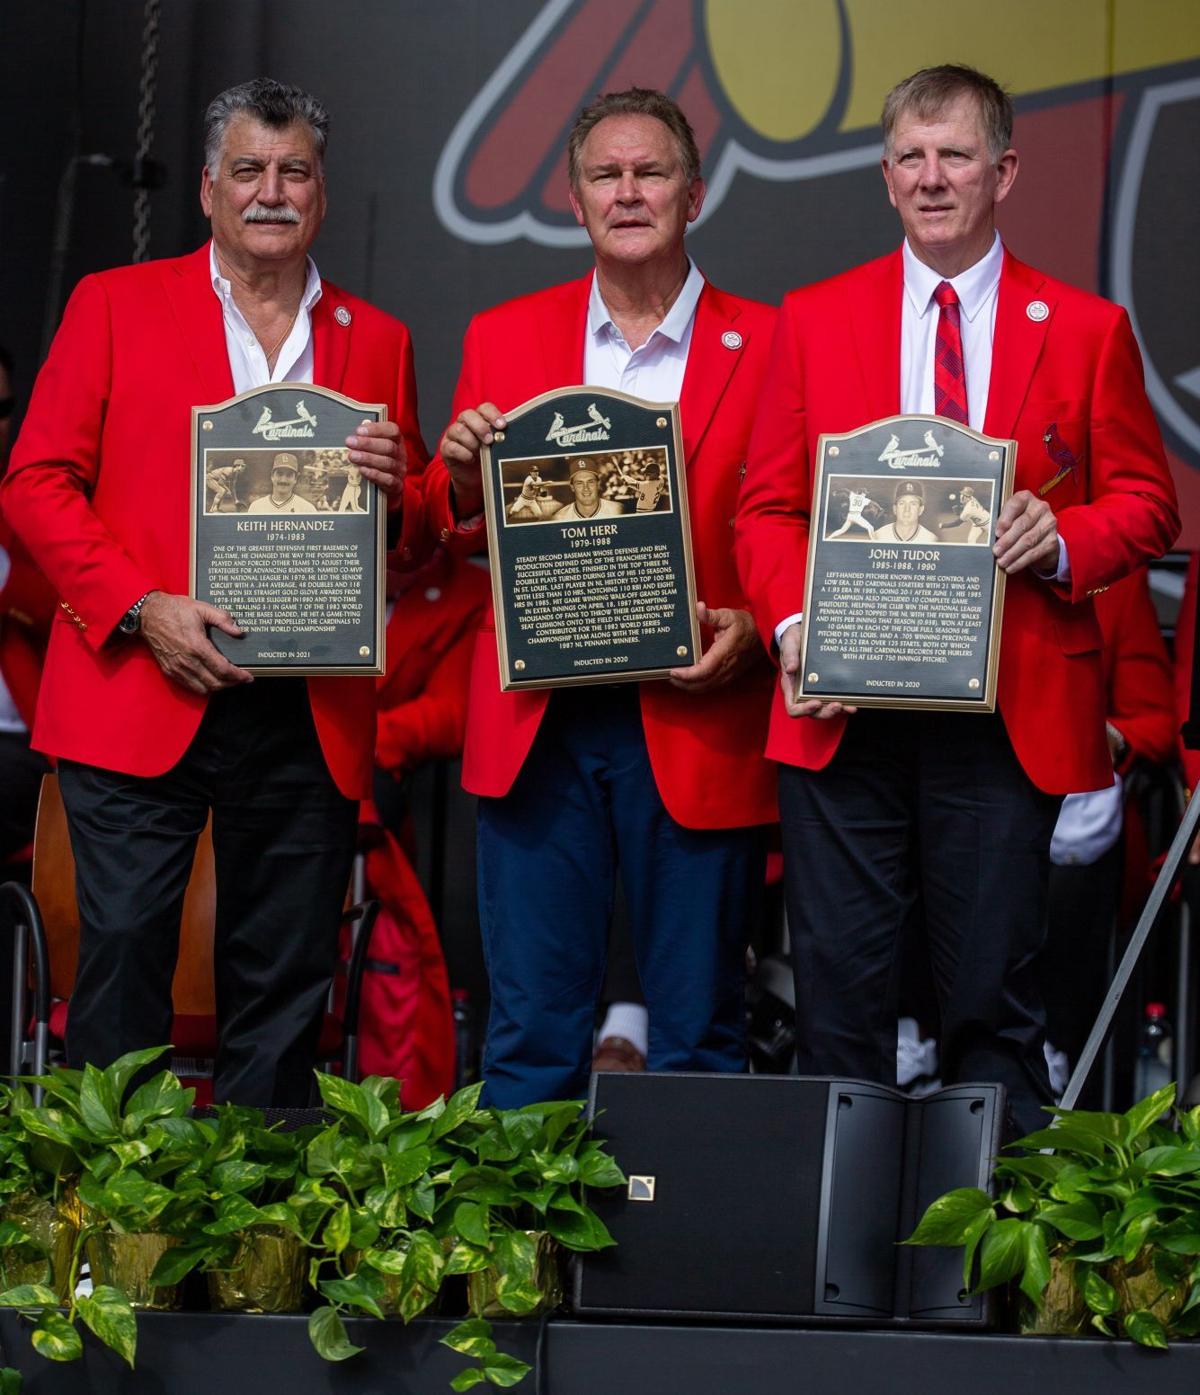 Cardinals Hall of Fame adds Herr, Tudor, and White